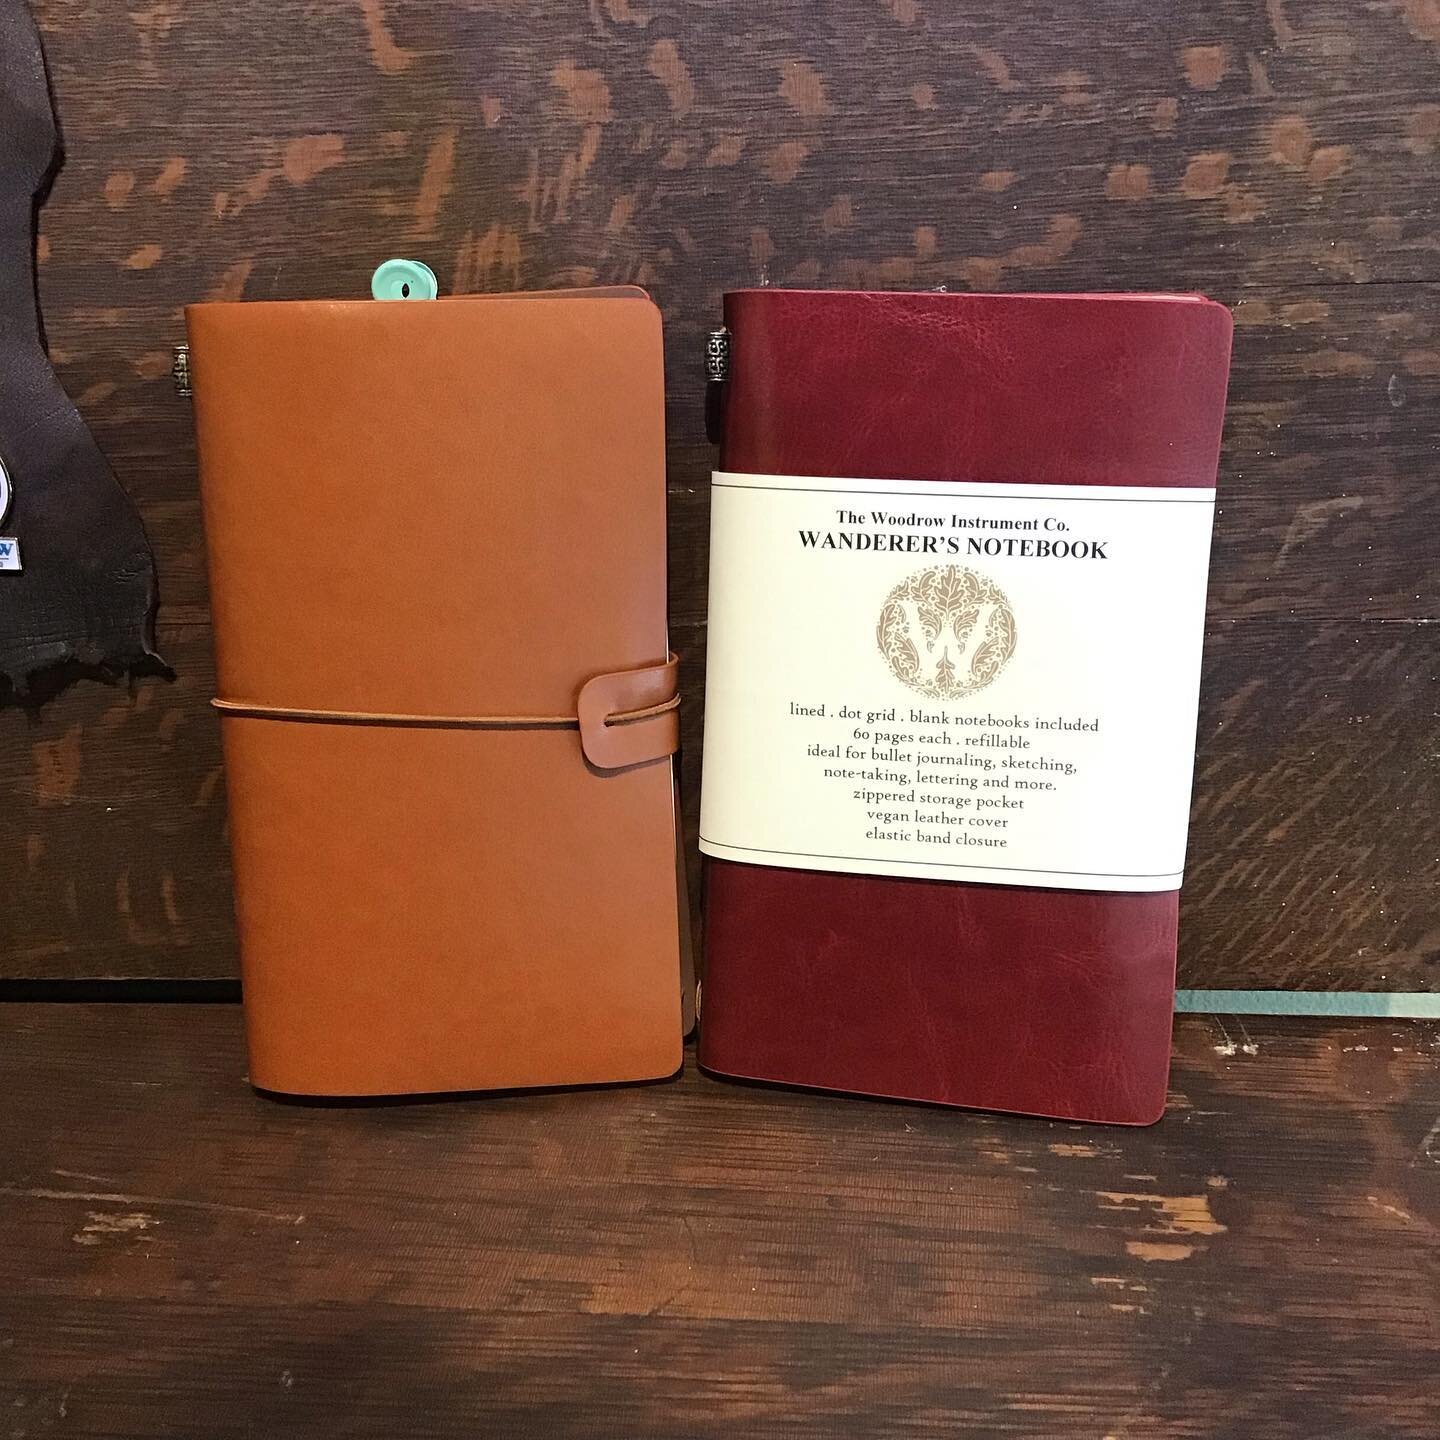 Wanderer&rsquo;s Notebook and score inserts (swipe over Instagramers)
#thewoodrow #woodrow